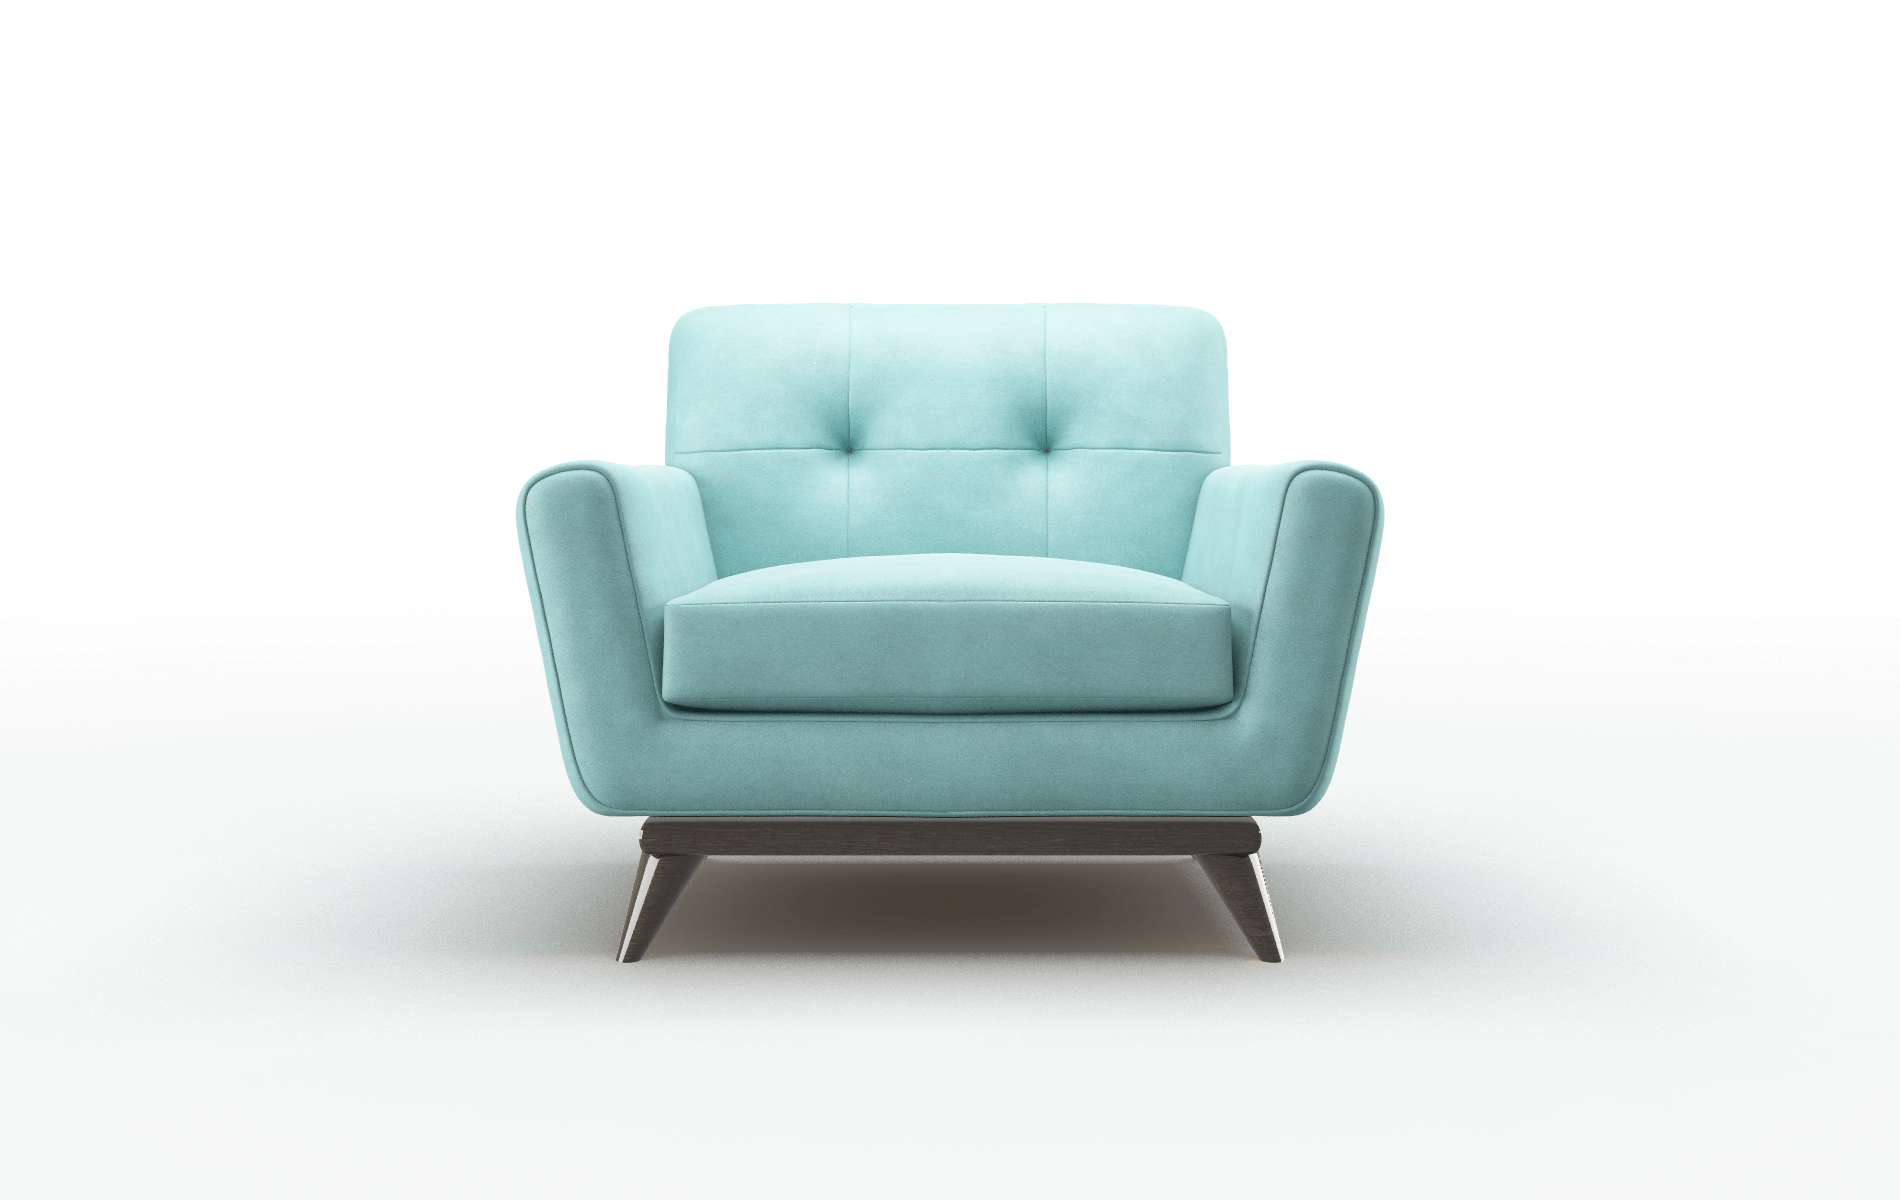 Brussels Curious Turquoise chair espresso legs